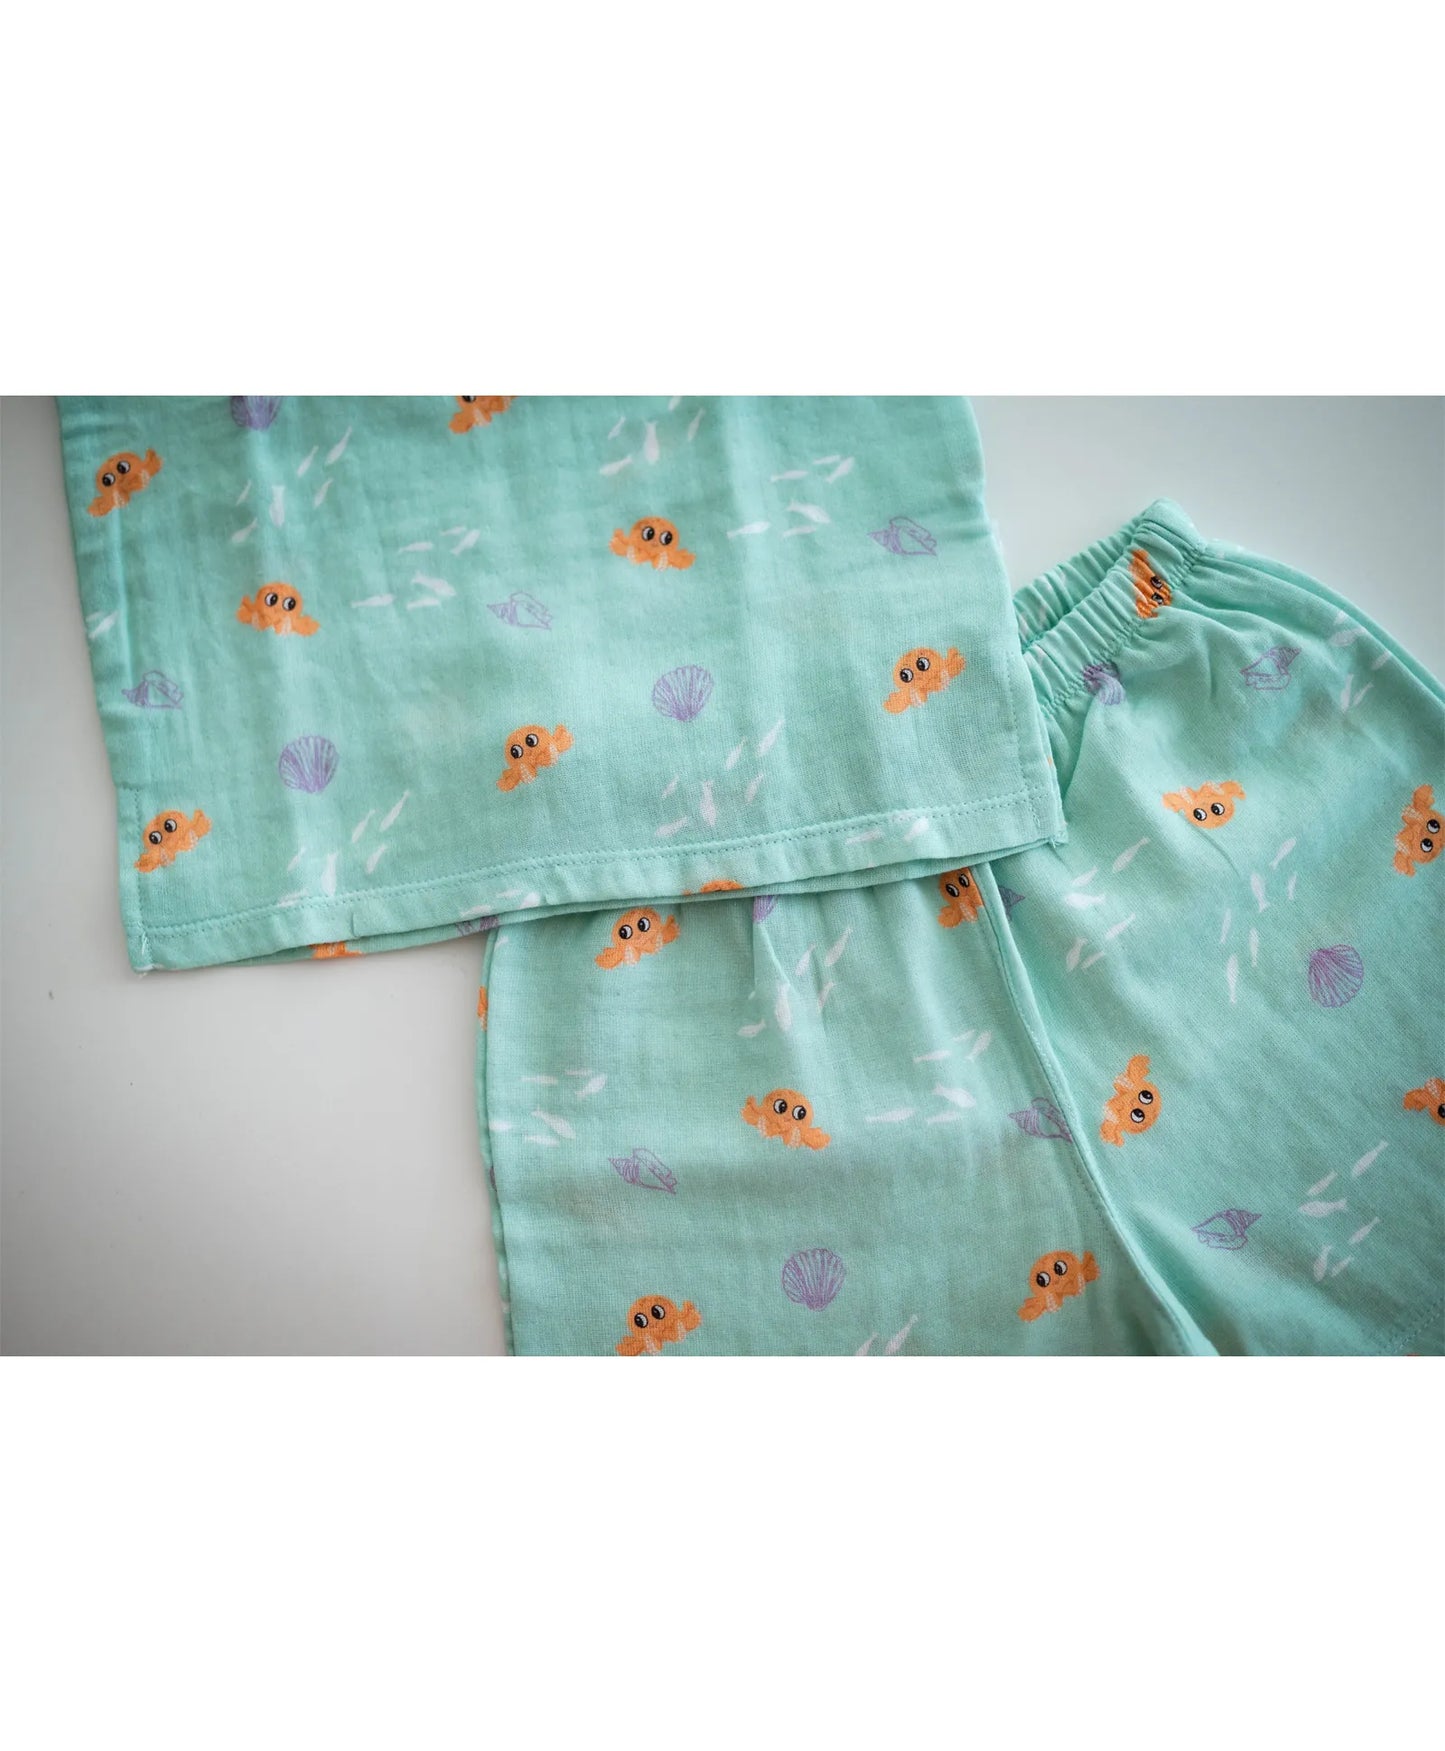 Tickle Tickle Organic Muslin Shorts and Tee Set - Lil Octy - Laadlee